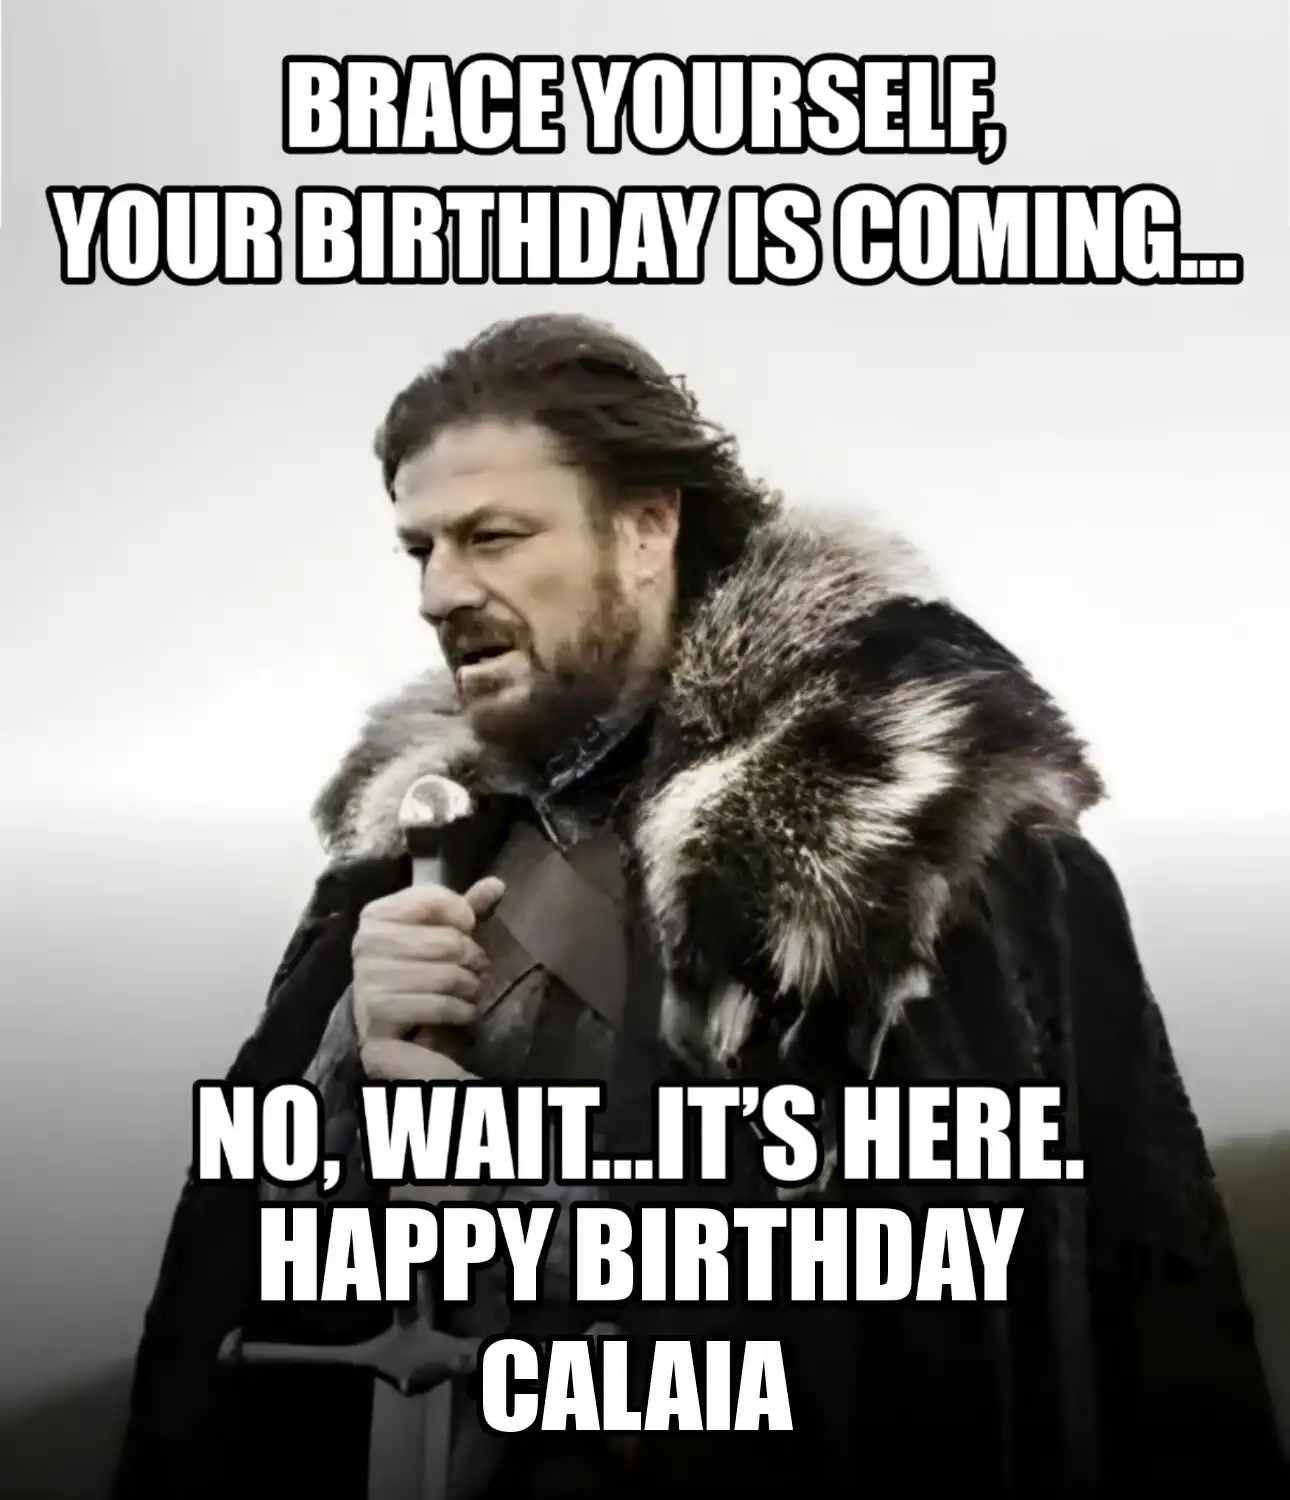 Happy Birthday Calaia Brace Yourself Your Birthday Is Coming Meme